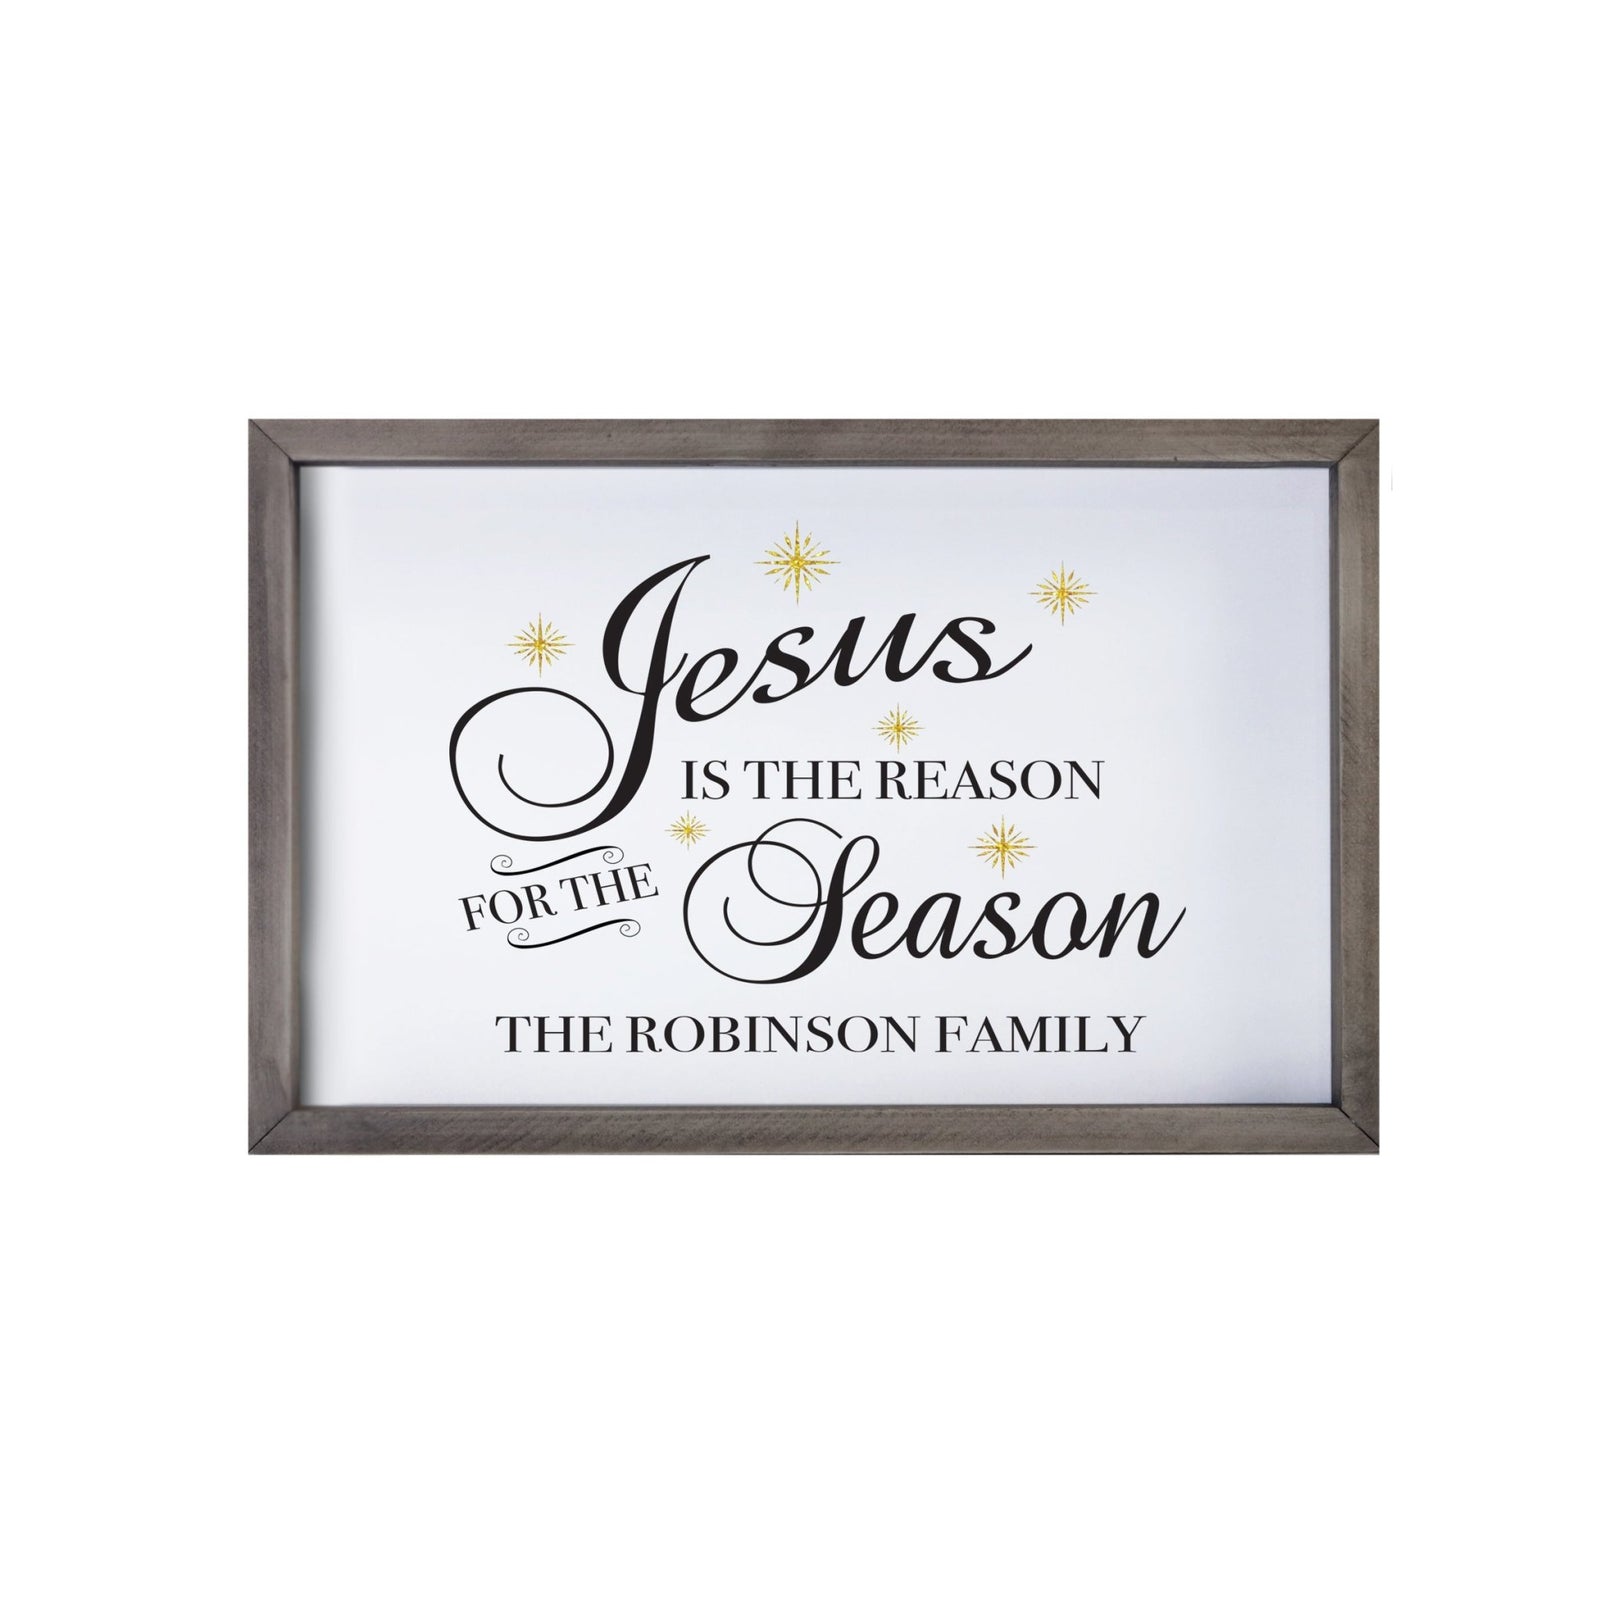 Personalized Merry Christmas Framed Shadow Box - Jesus Is The Reason - LifeSong Milestones